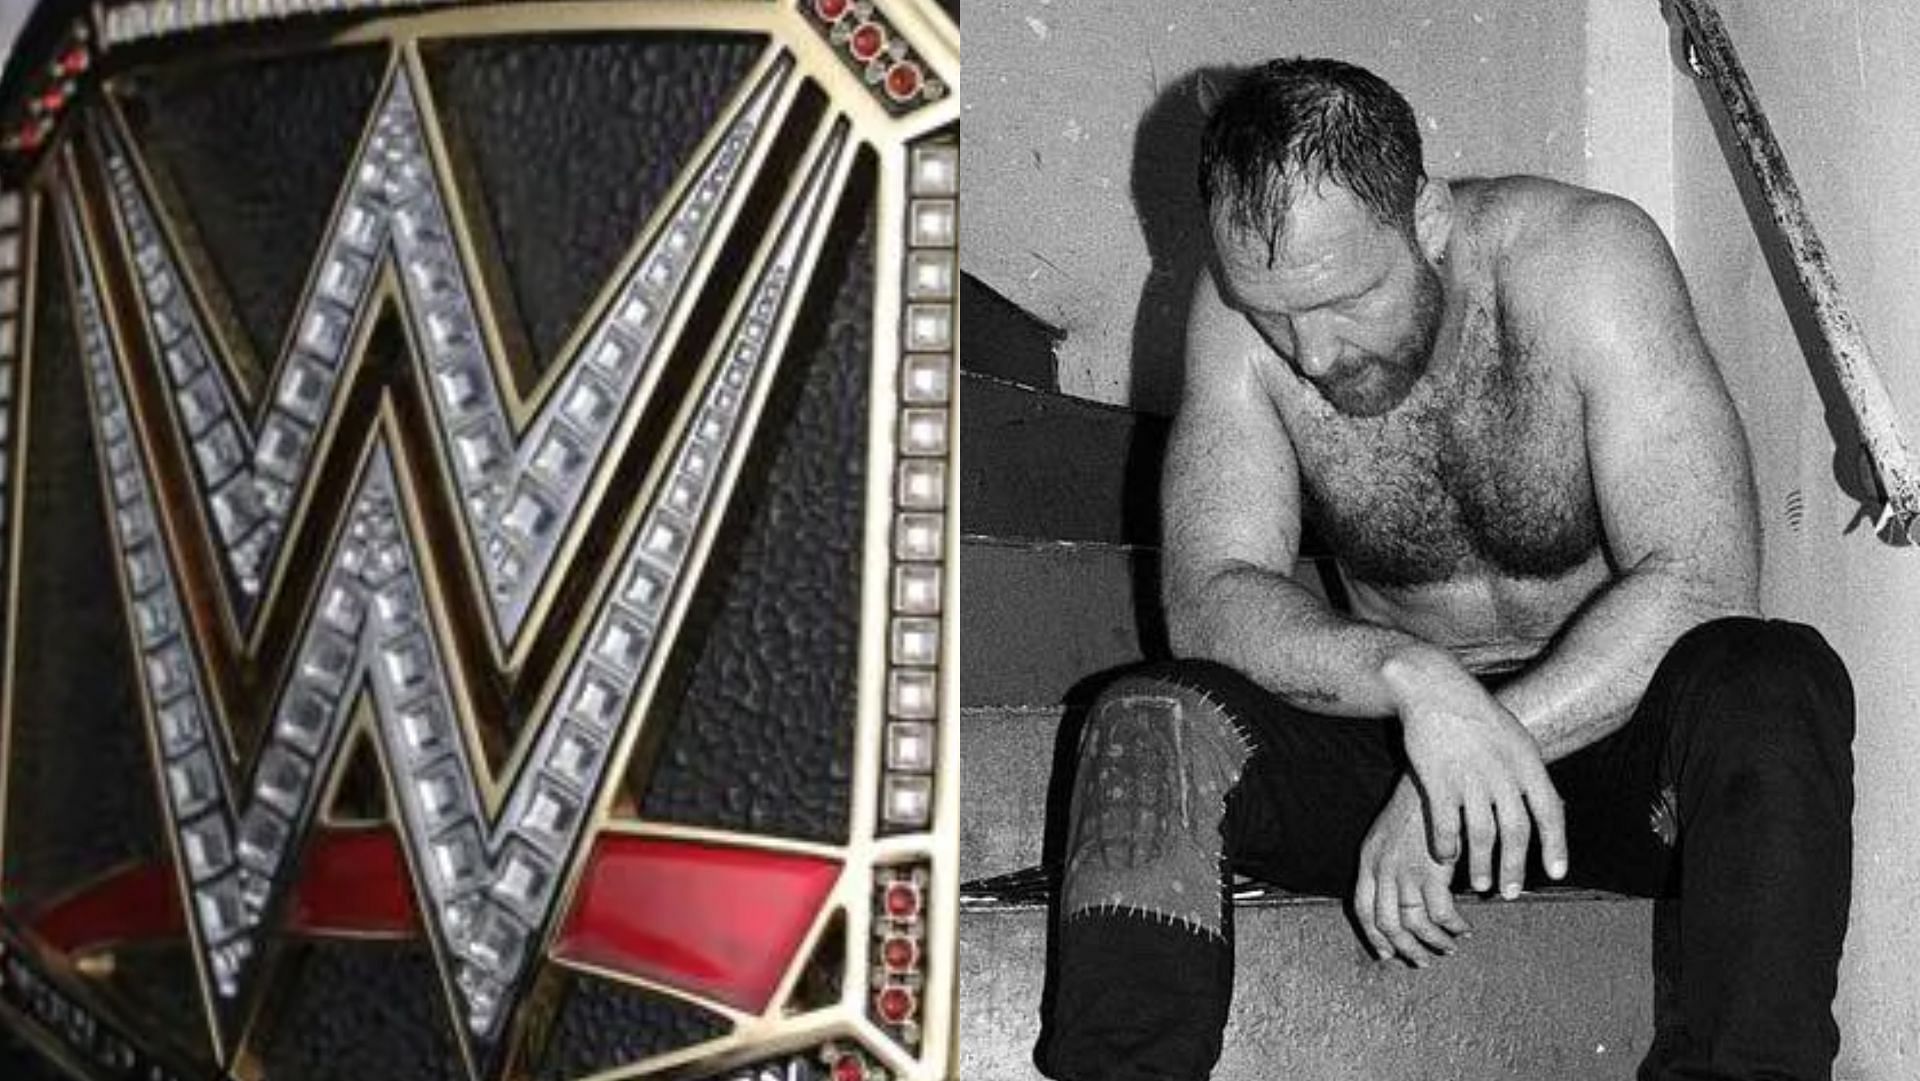 A former WWE Champion wants to be more like Jon Moxley